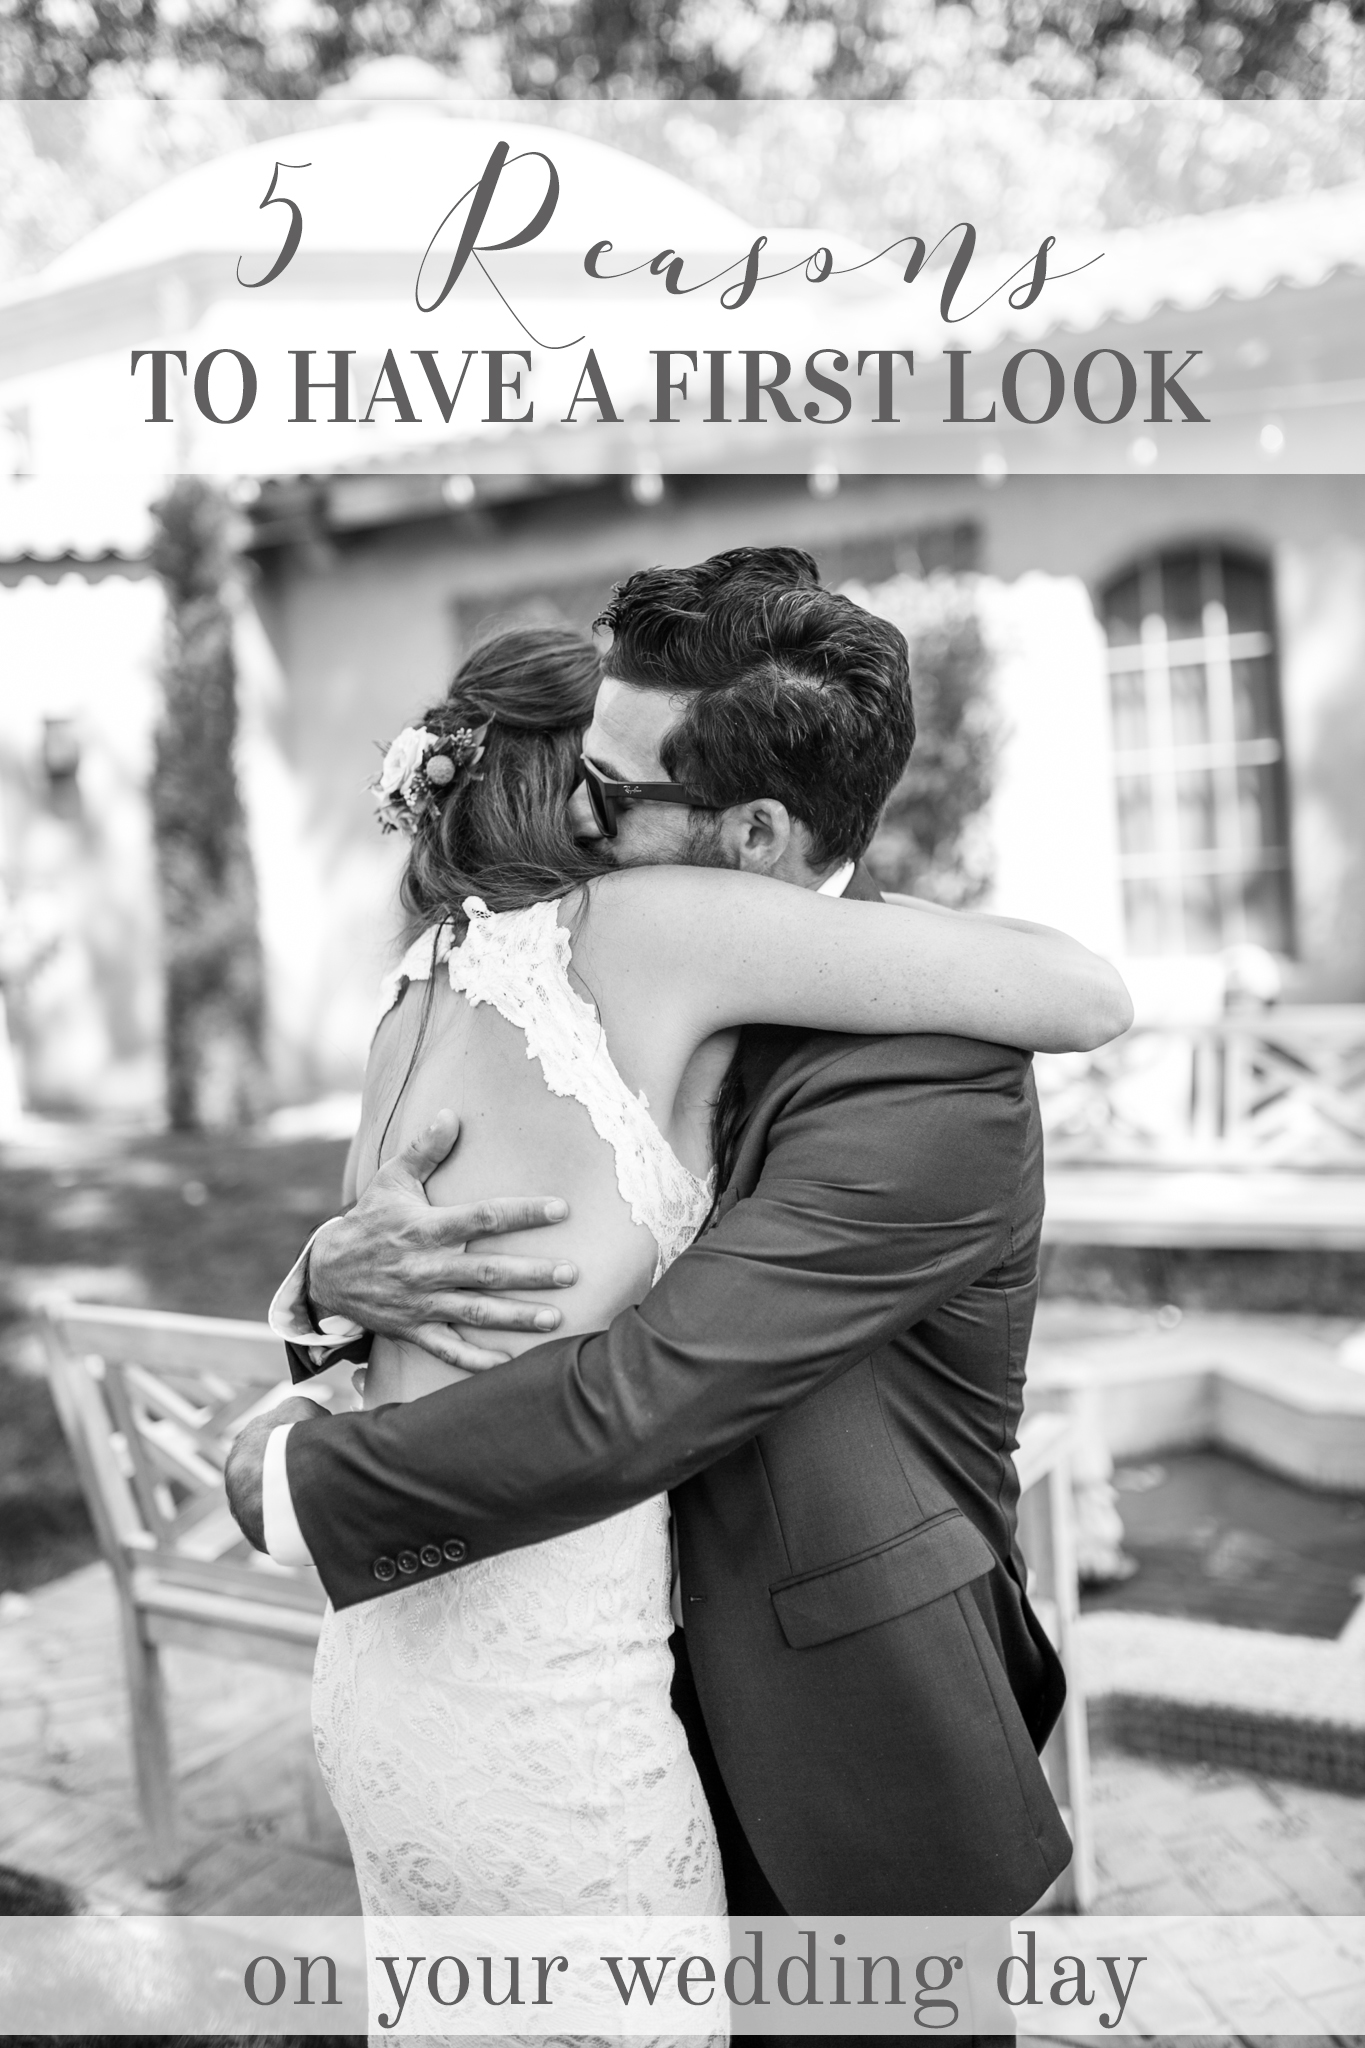 5 Reasons to Have a First Look on Your Wedding Day